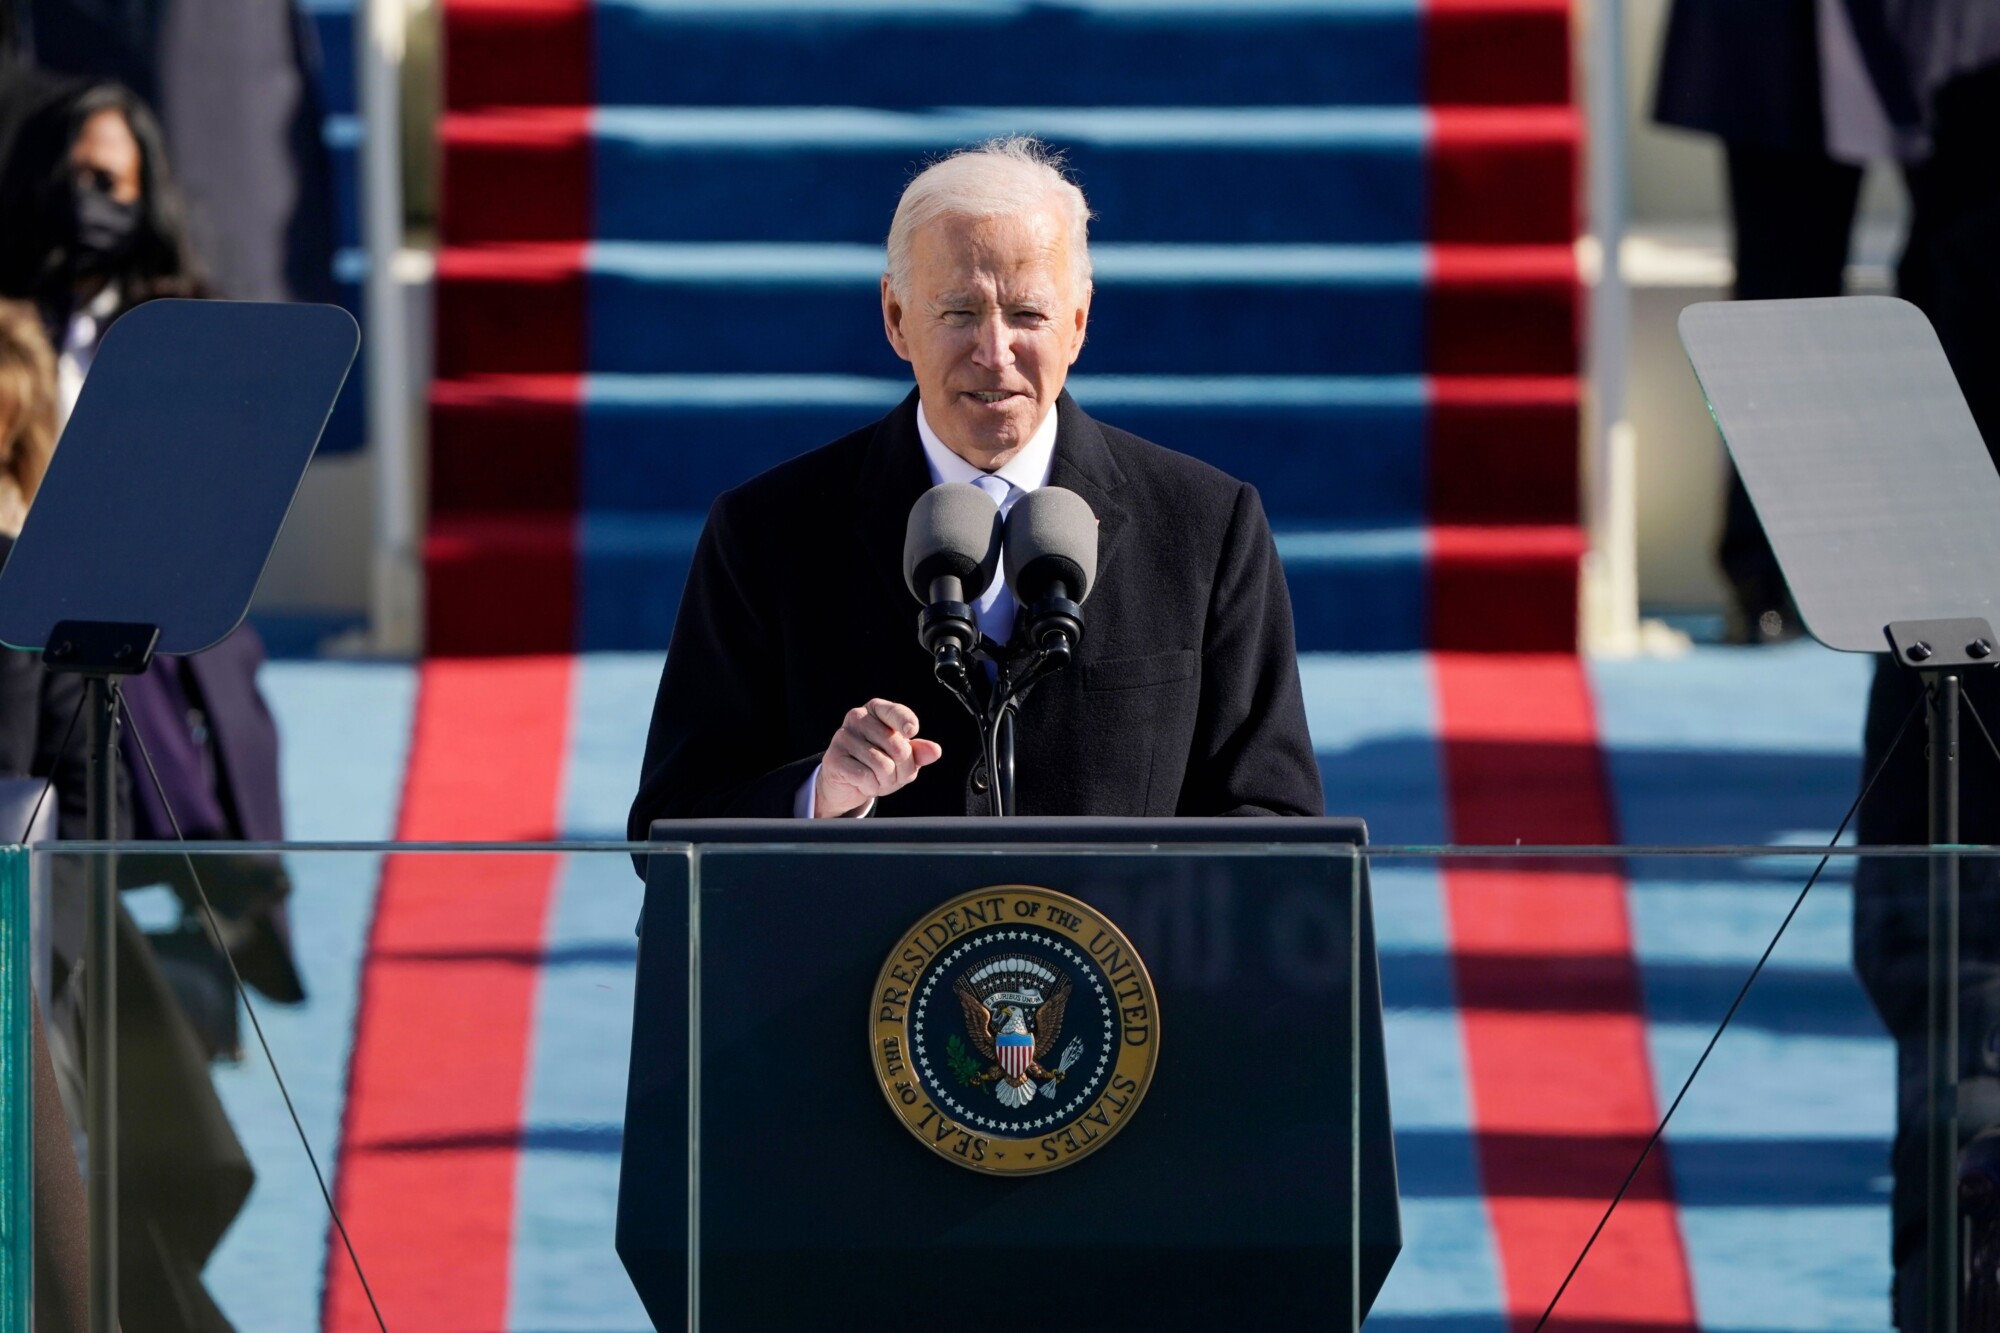 Biden to Cancel Trump’s 1776 Commission That Promotes American Founding Values